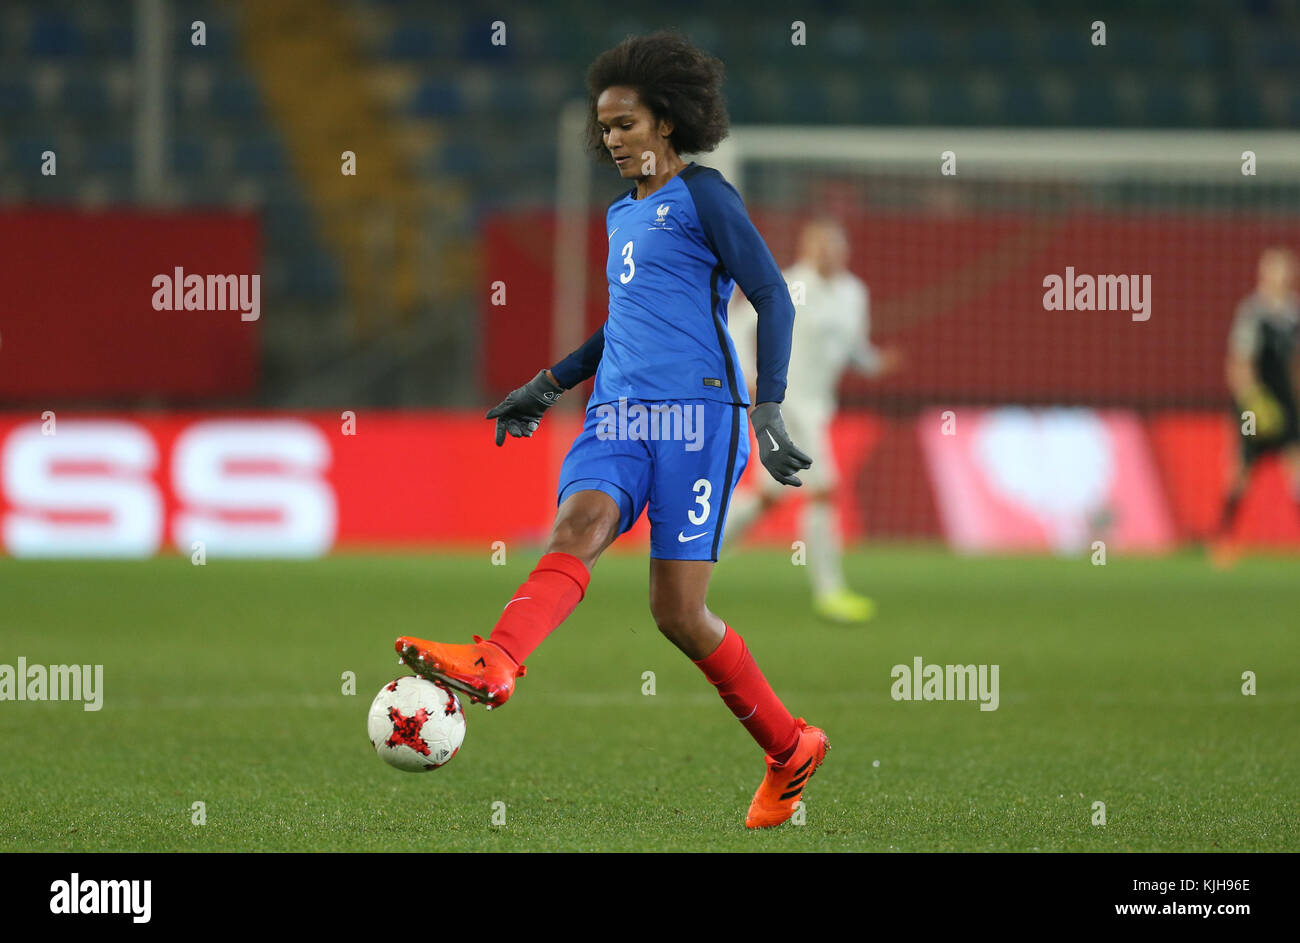 Bielefeld, Germany. 24th Nov, 2017. France's Wendie Renard in action during the women's international friendly soccer match between Germany and France in the Schueco Arena stadium in Bielefeld, Germany, 24 November 2017. Credit: Friso Gentsch/dpa/Alamy Live News Stock Photo